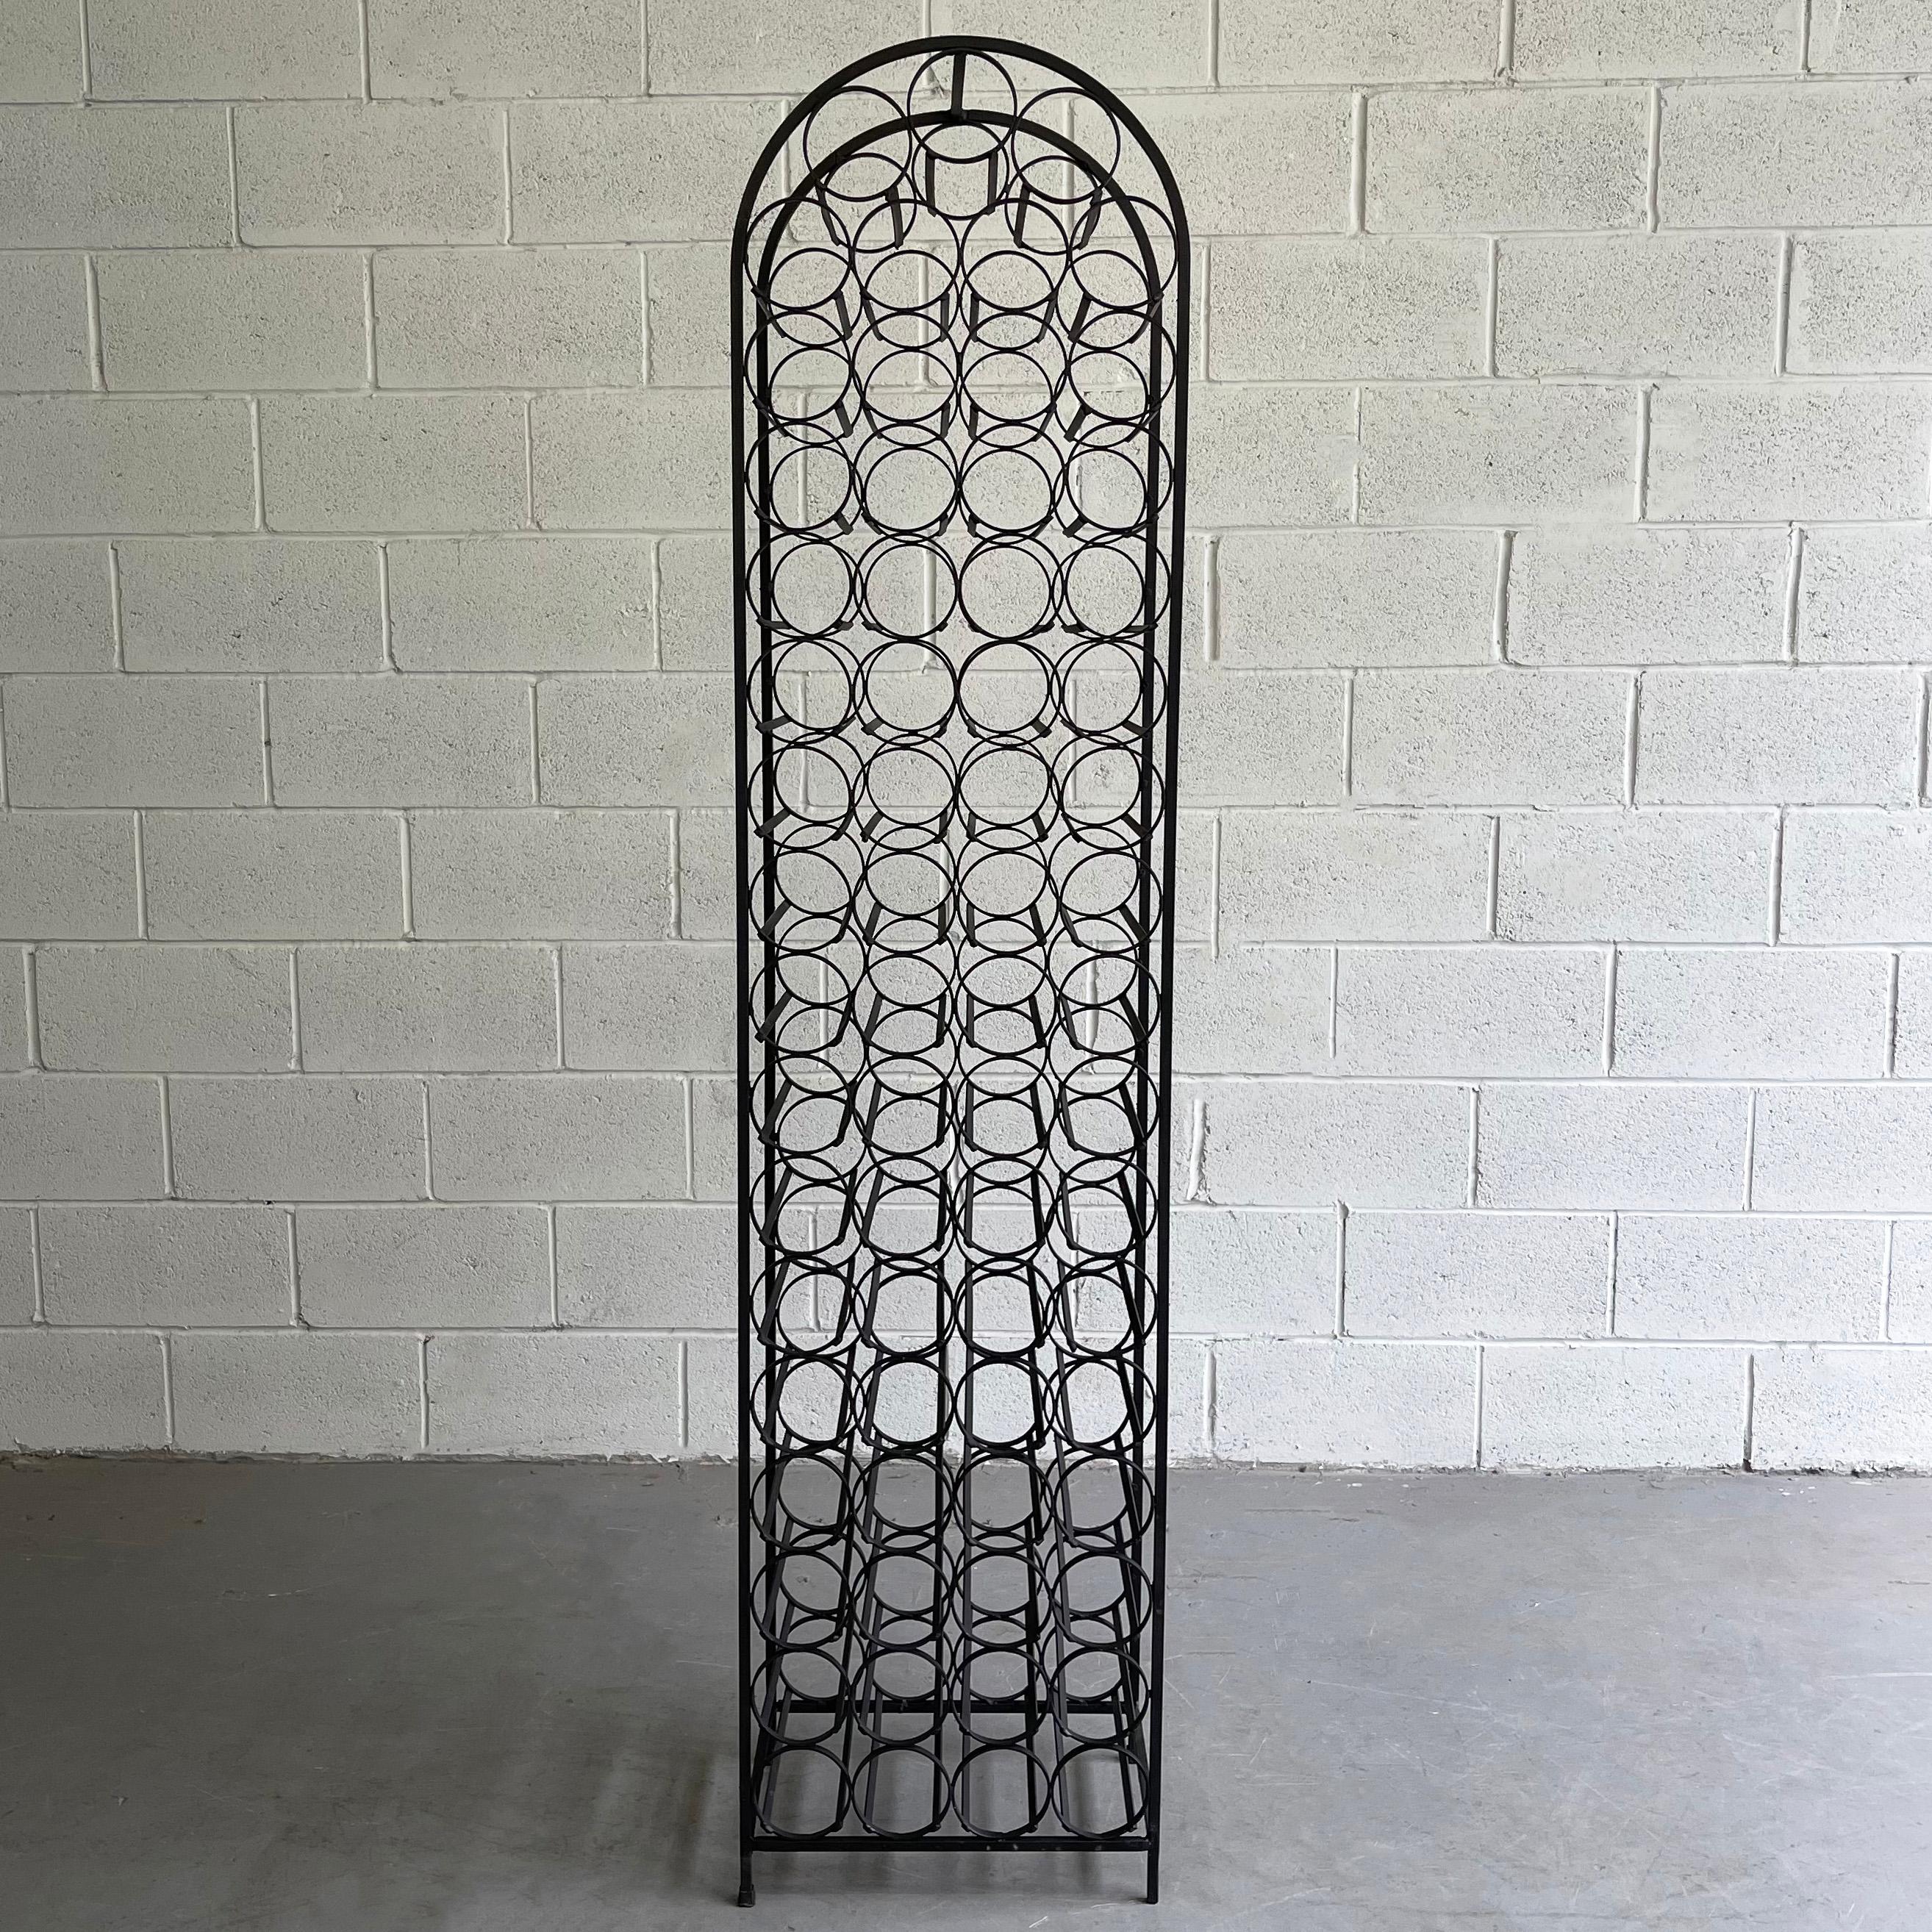 Tall, Mid-Century Modern, free-standing, wrought iron, wine rack by Arthur Umanoff for shaver howard offers stylish wine storage for 67 bottle capacity.